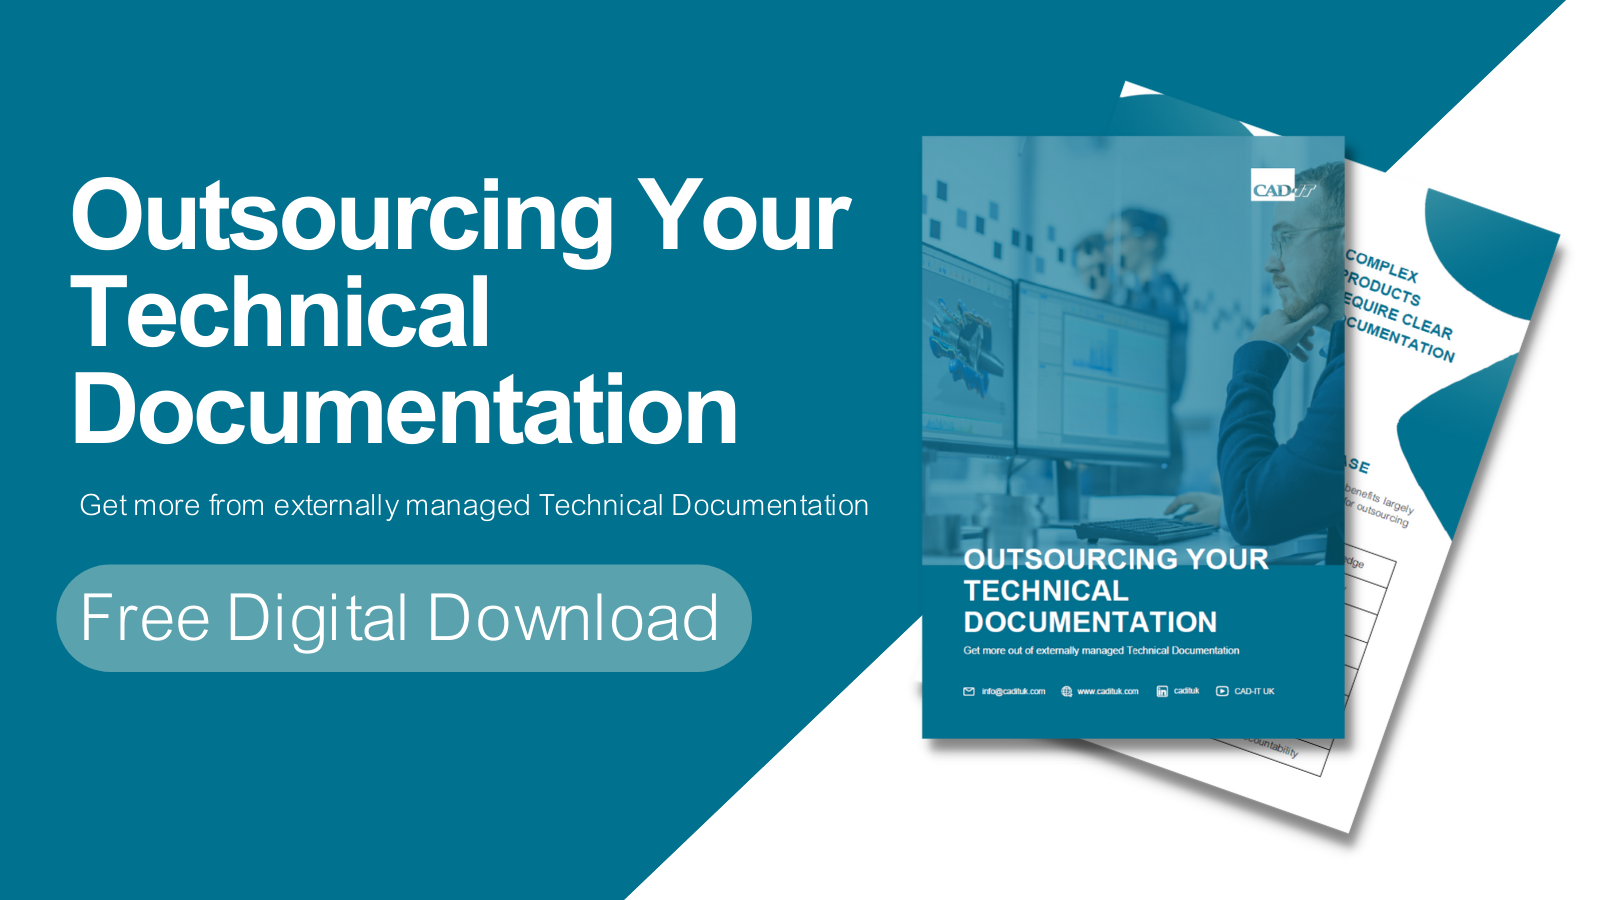 Free content download for 'outsourcing your technical documentation' pdf